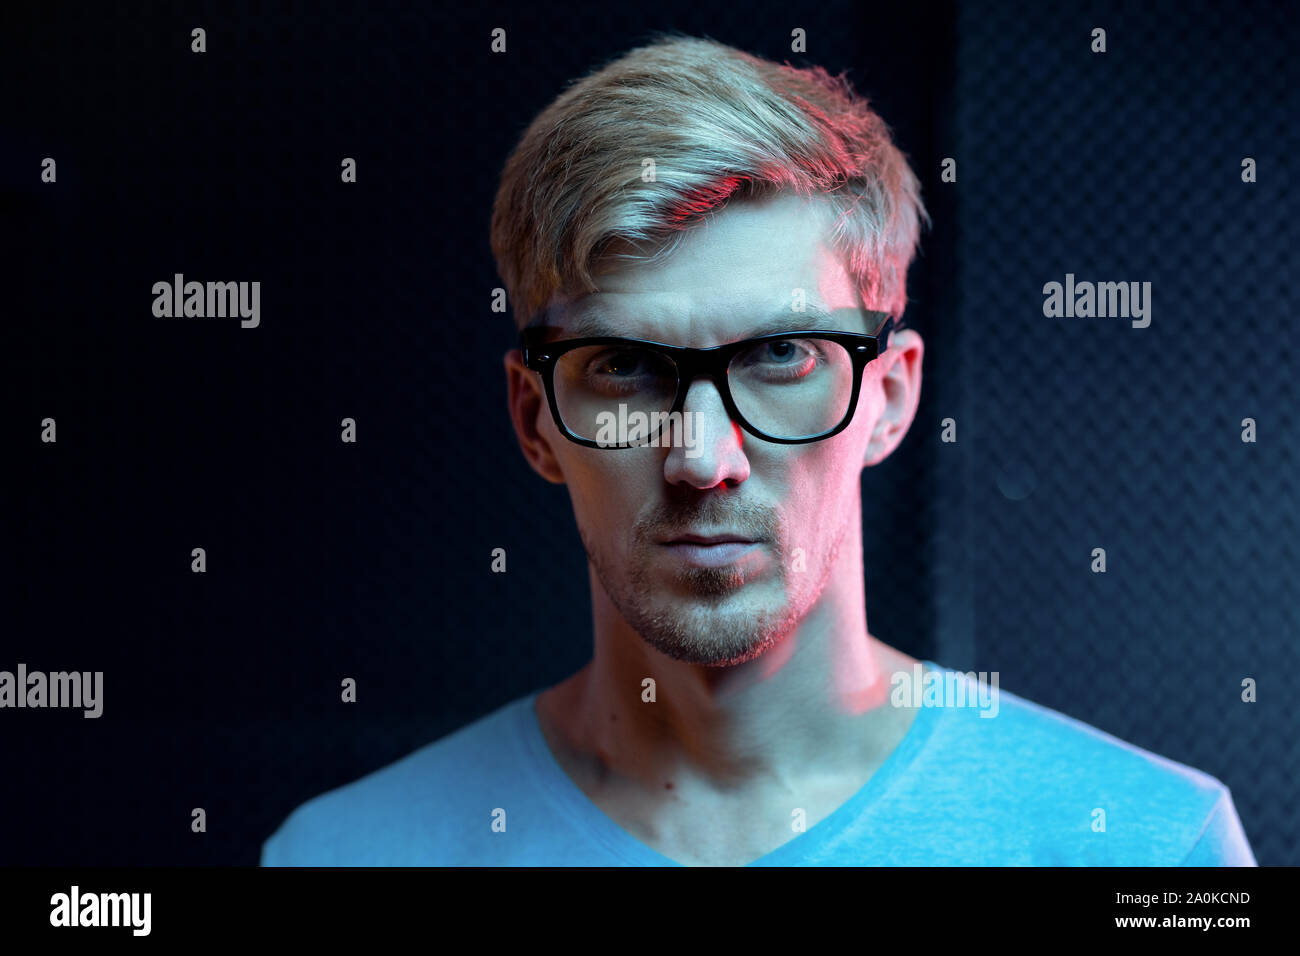 Serious young blond man of Caucasian ethnicity looking at you through eyeglasses Stock Photo